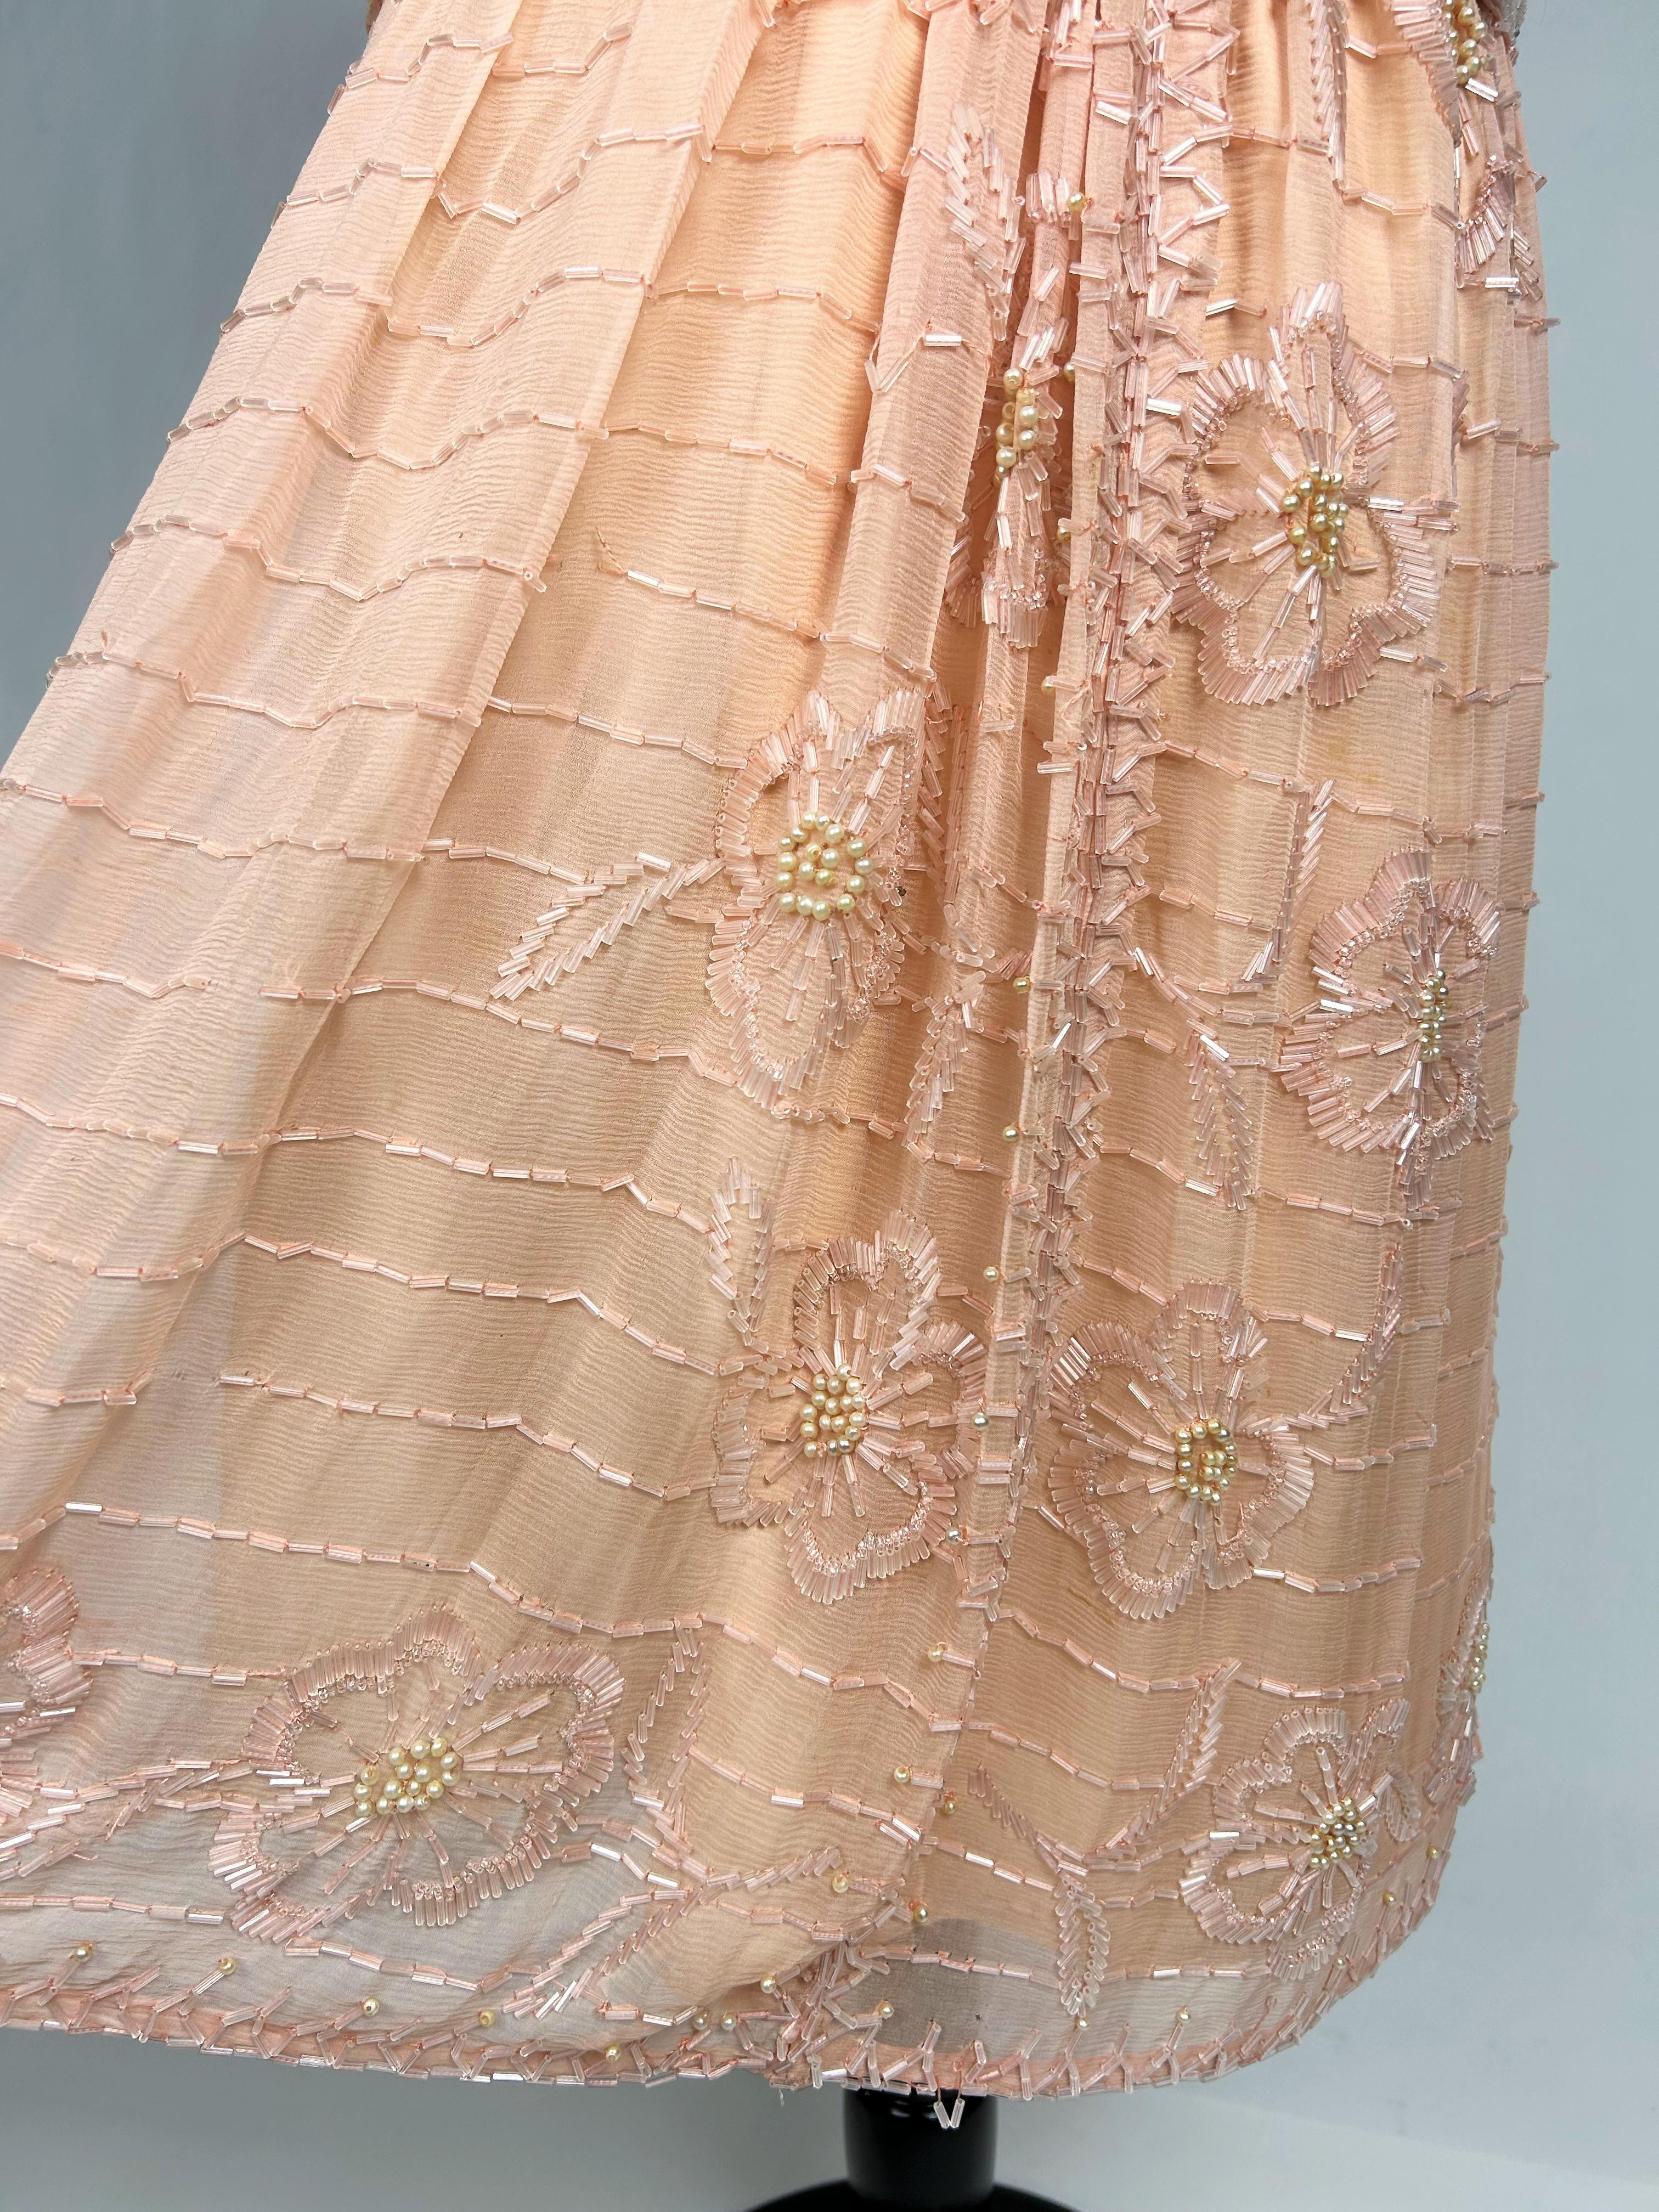 A Salmon embroidered Chiffon Flapper Dress - France Circa 1925 For Sale 7